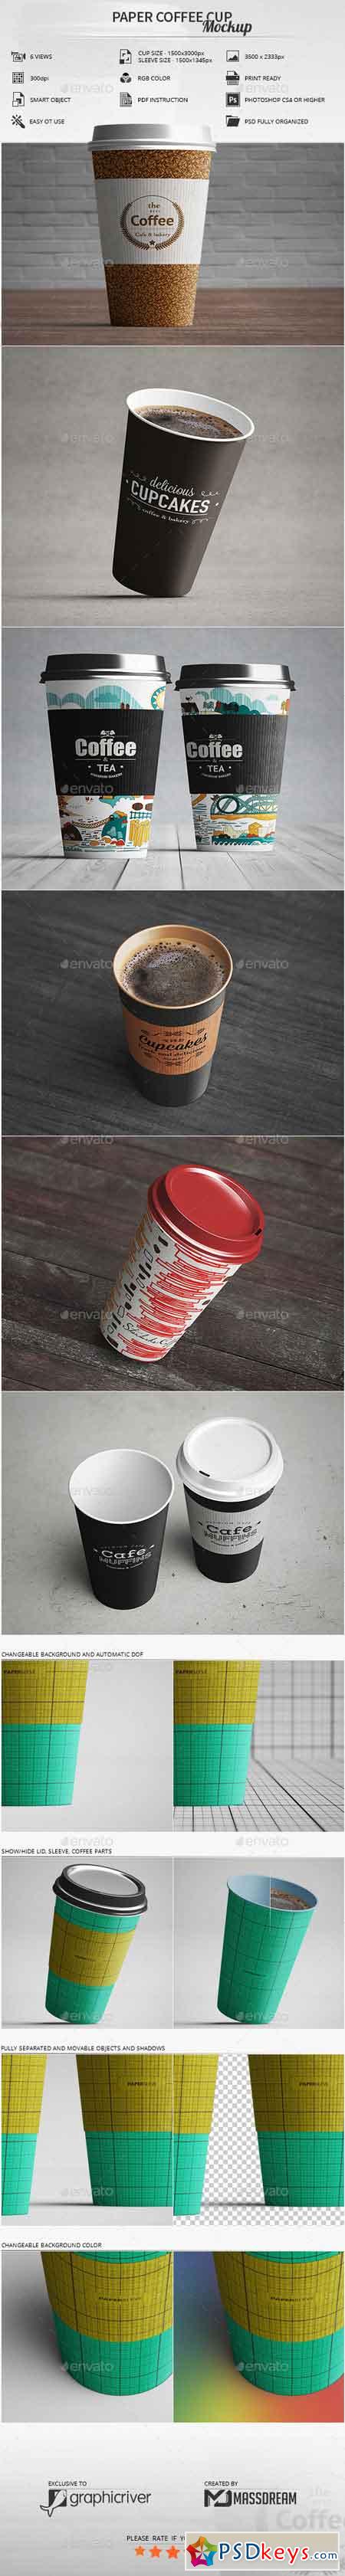 Paper Coffee Cup Mockup 16532404